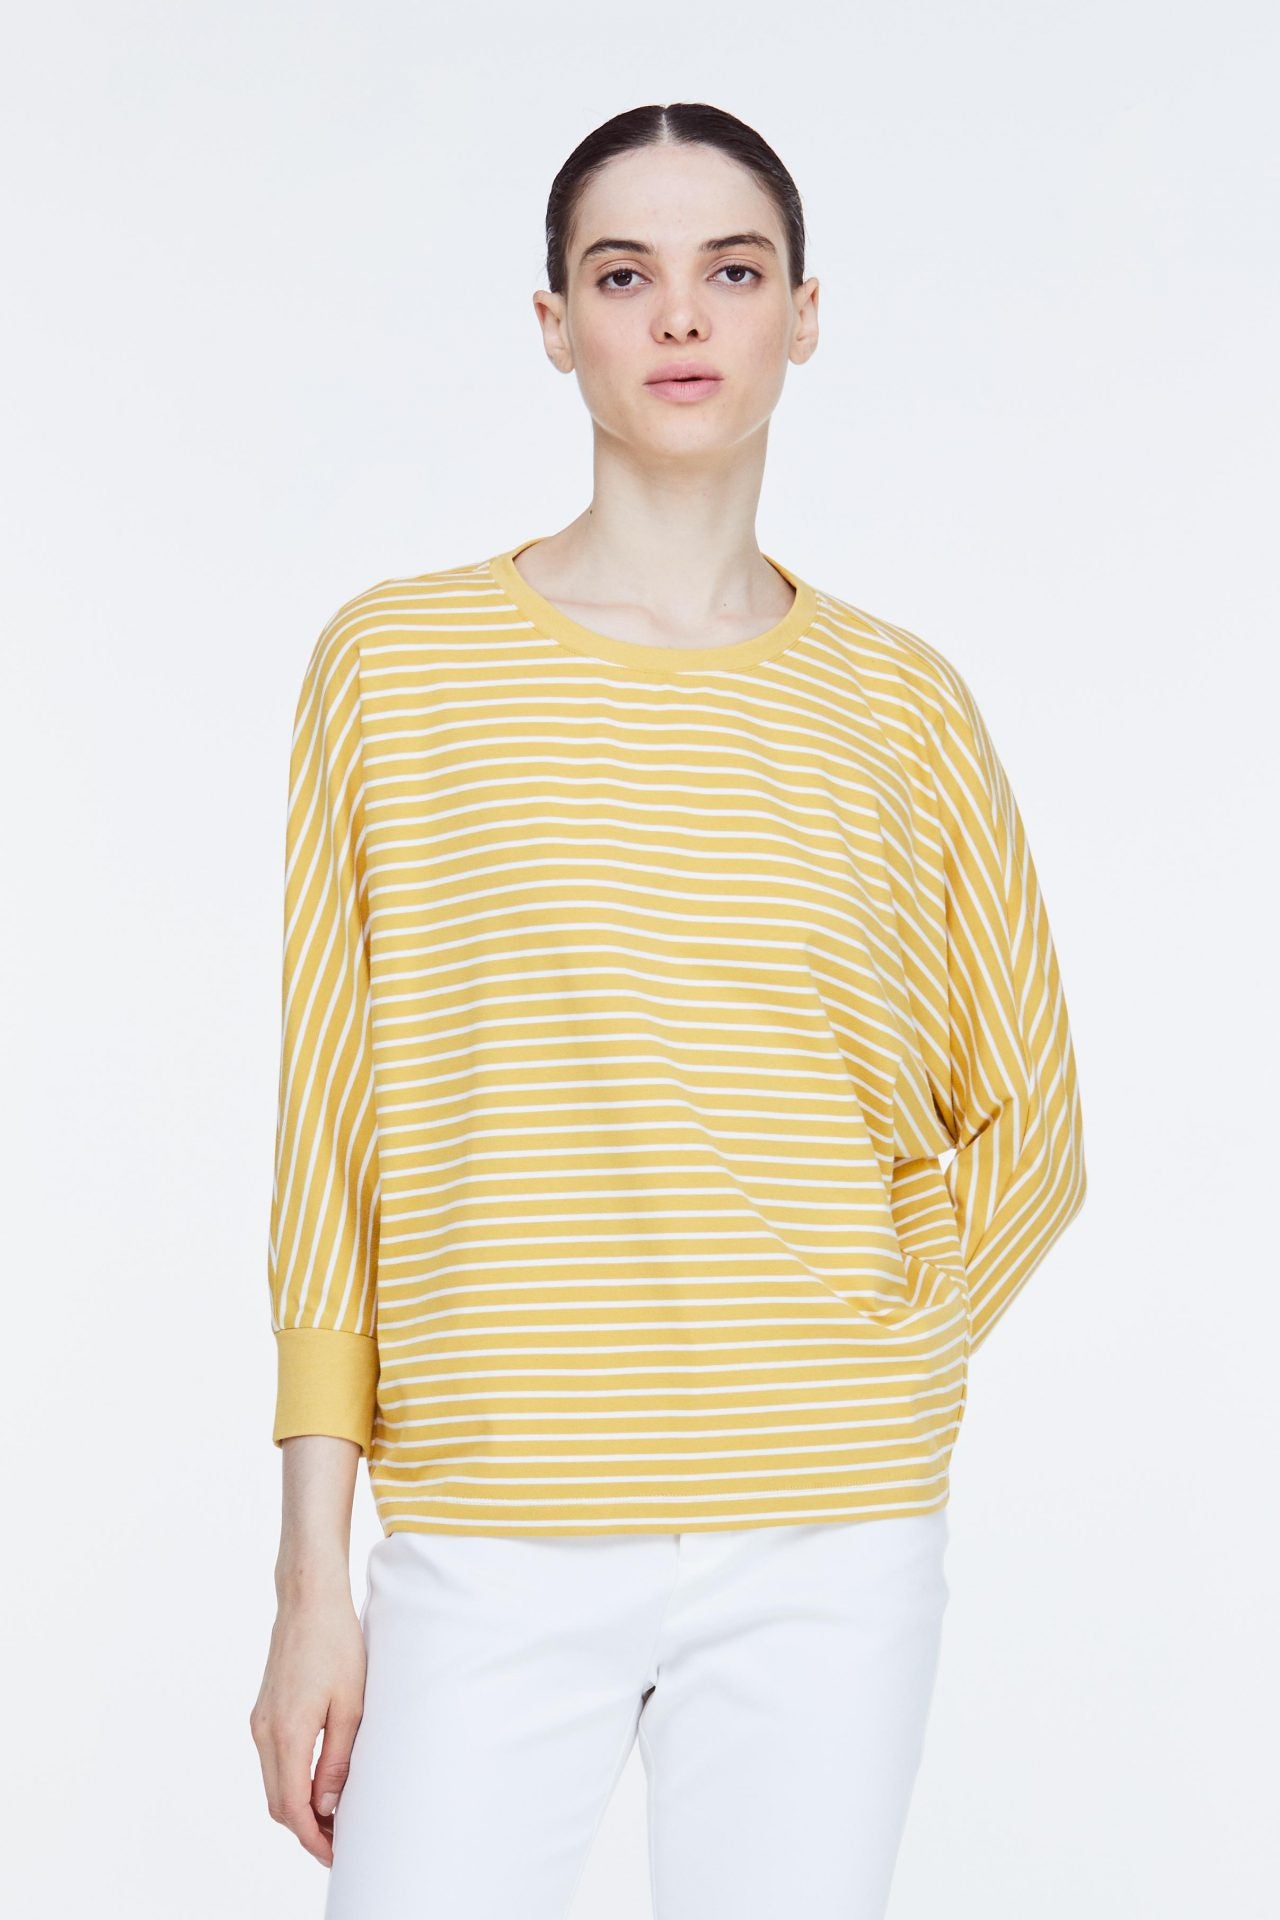 ATB 11278 LONG SLEEVED ROUND NECK TOP YELLOW